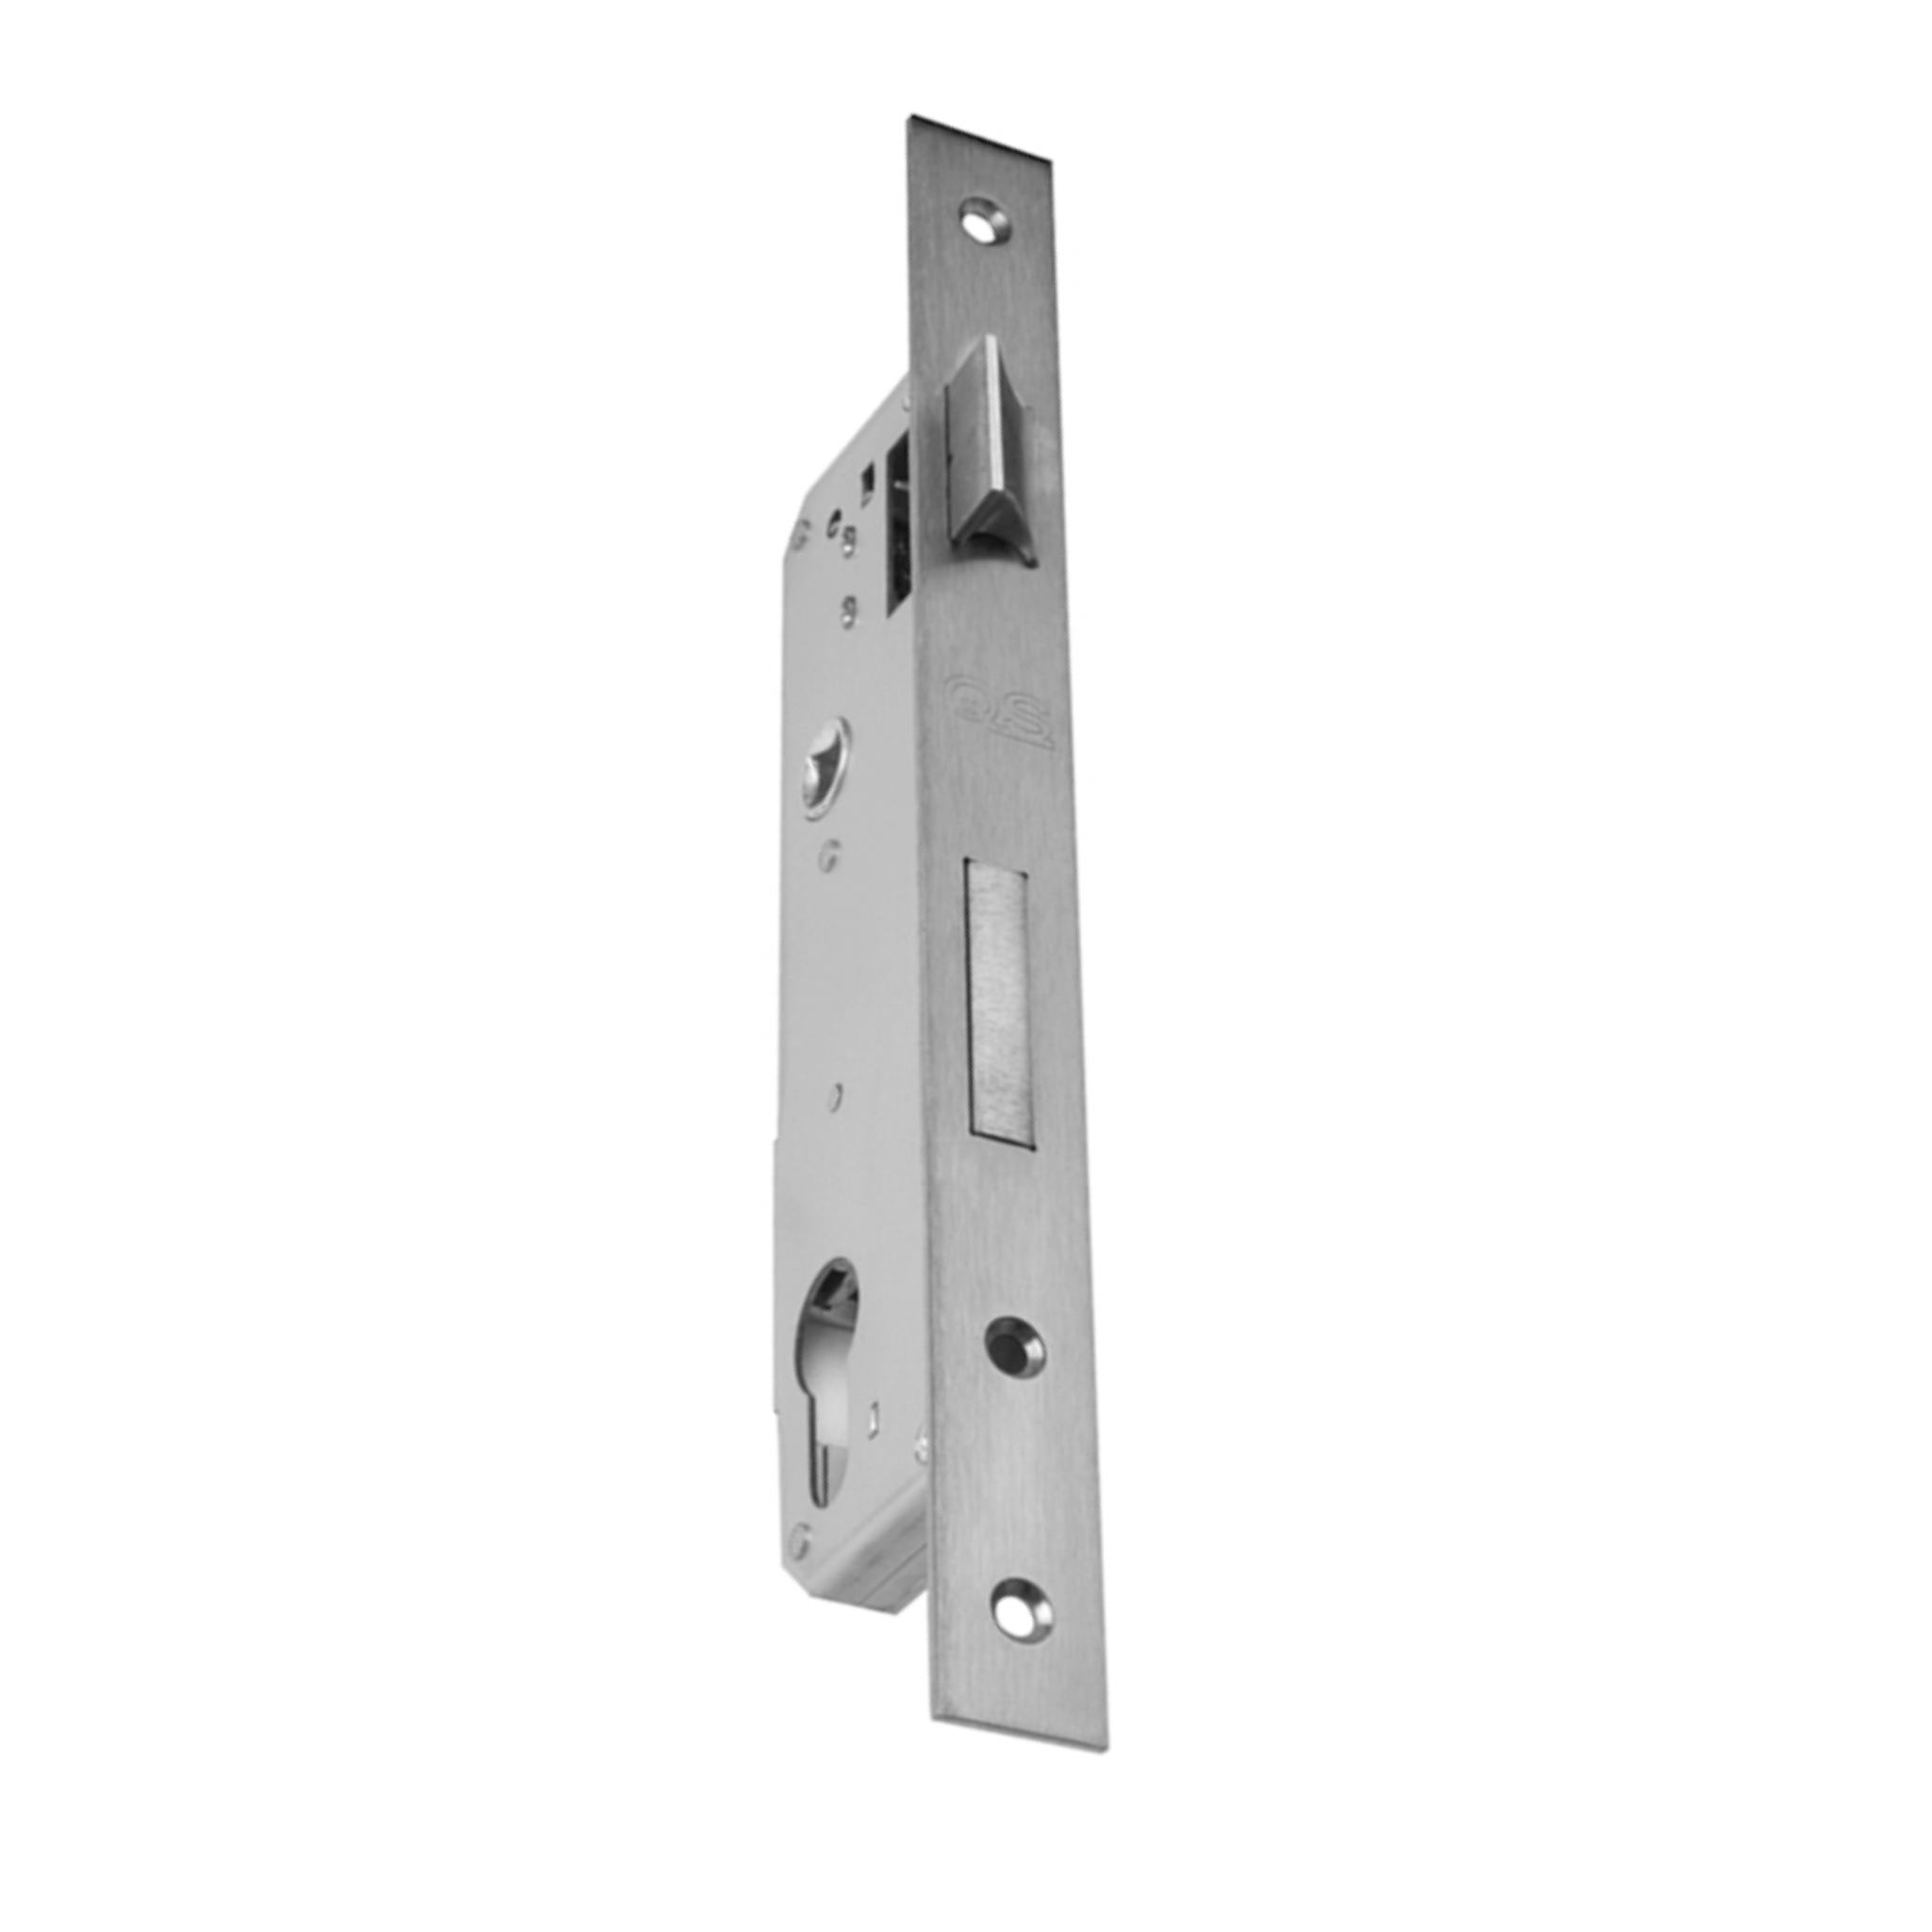 QS8535/1SS, Narrow Style, Latch & Deadbolt Lock, Euro Cylinder, Excluding Cylinder, 35mm (Backset), 85mm (ctc), Stainless Steel, QS